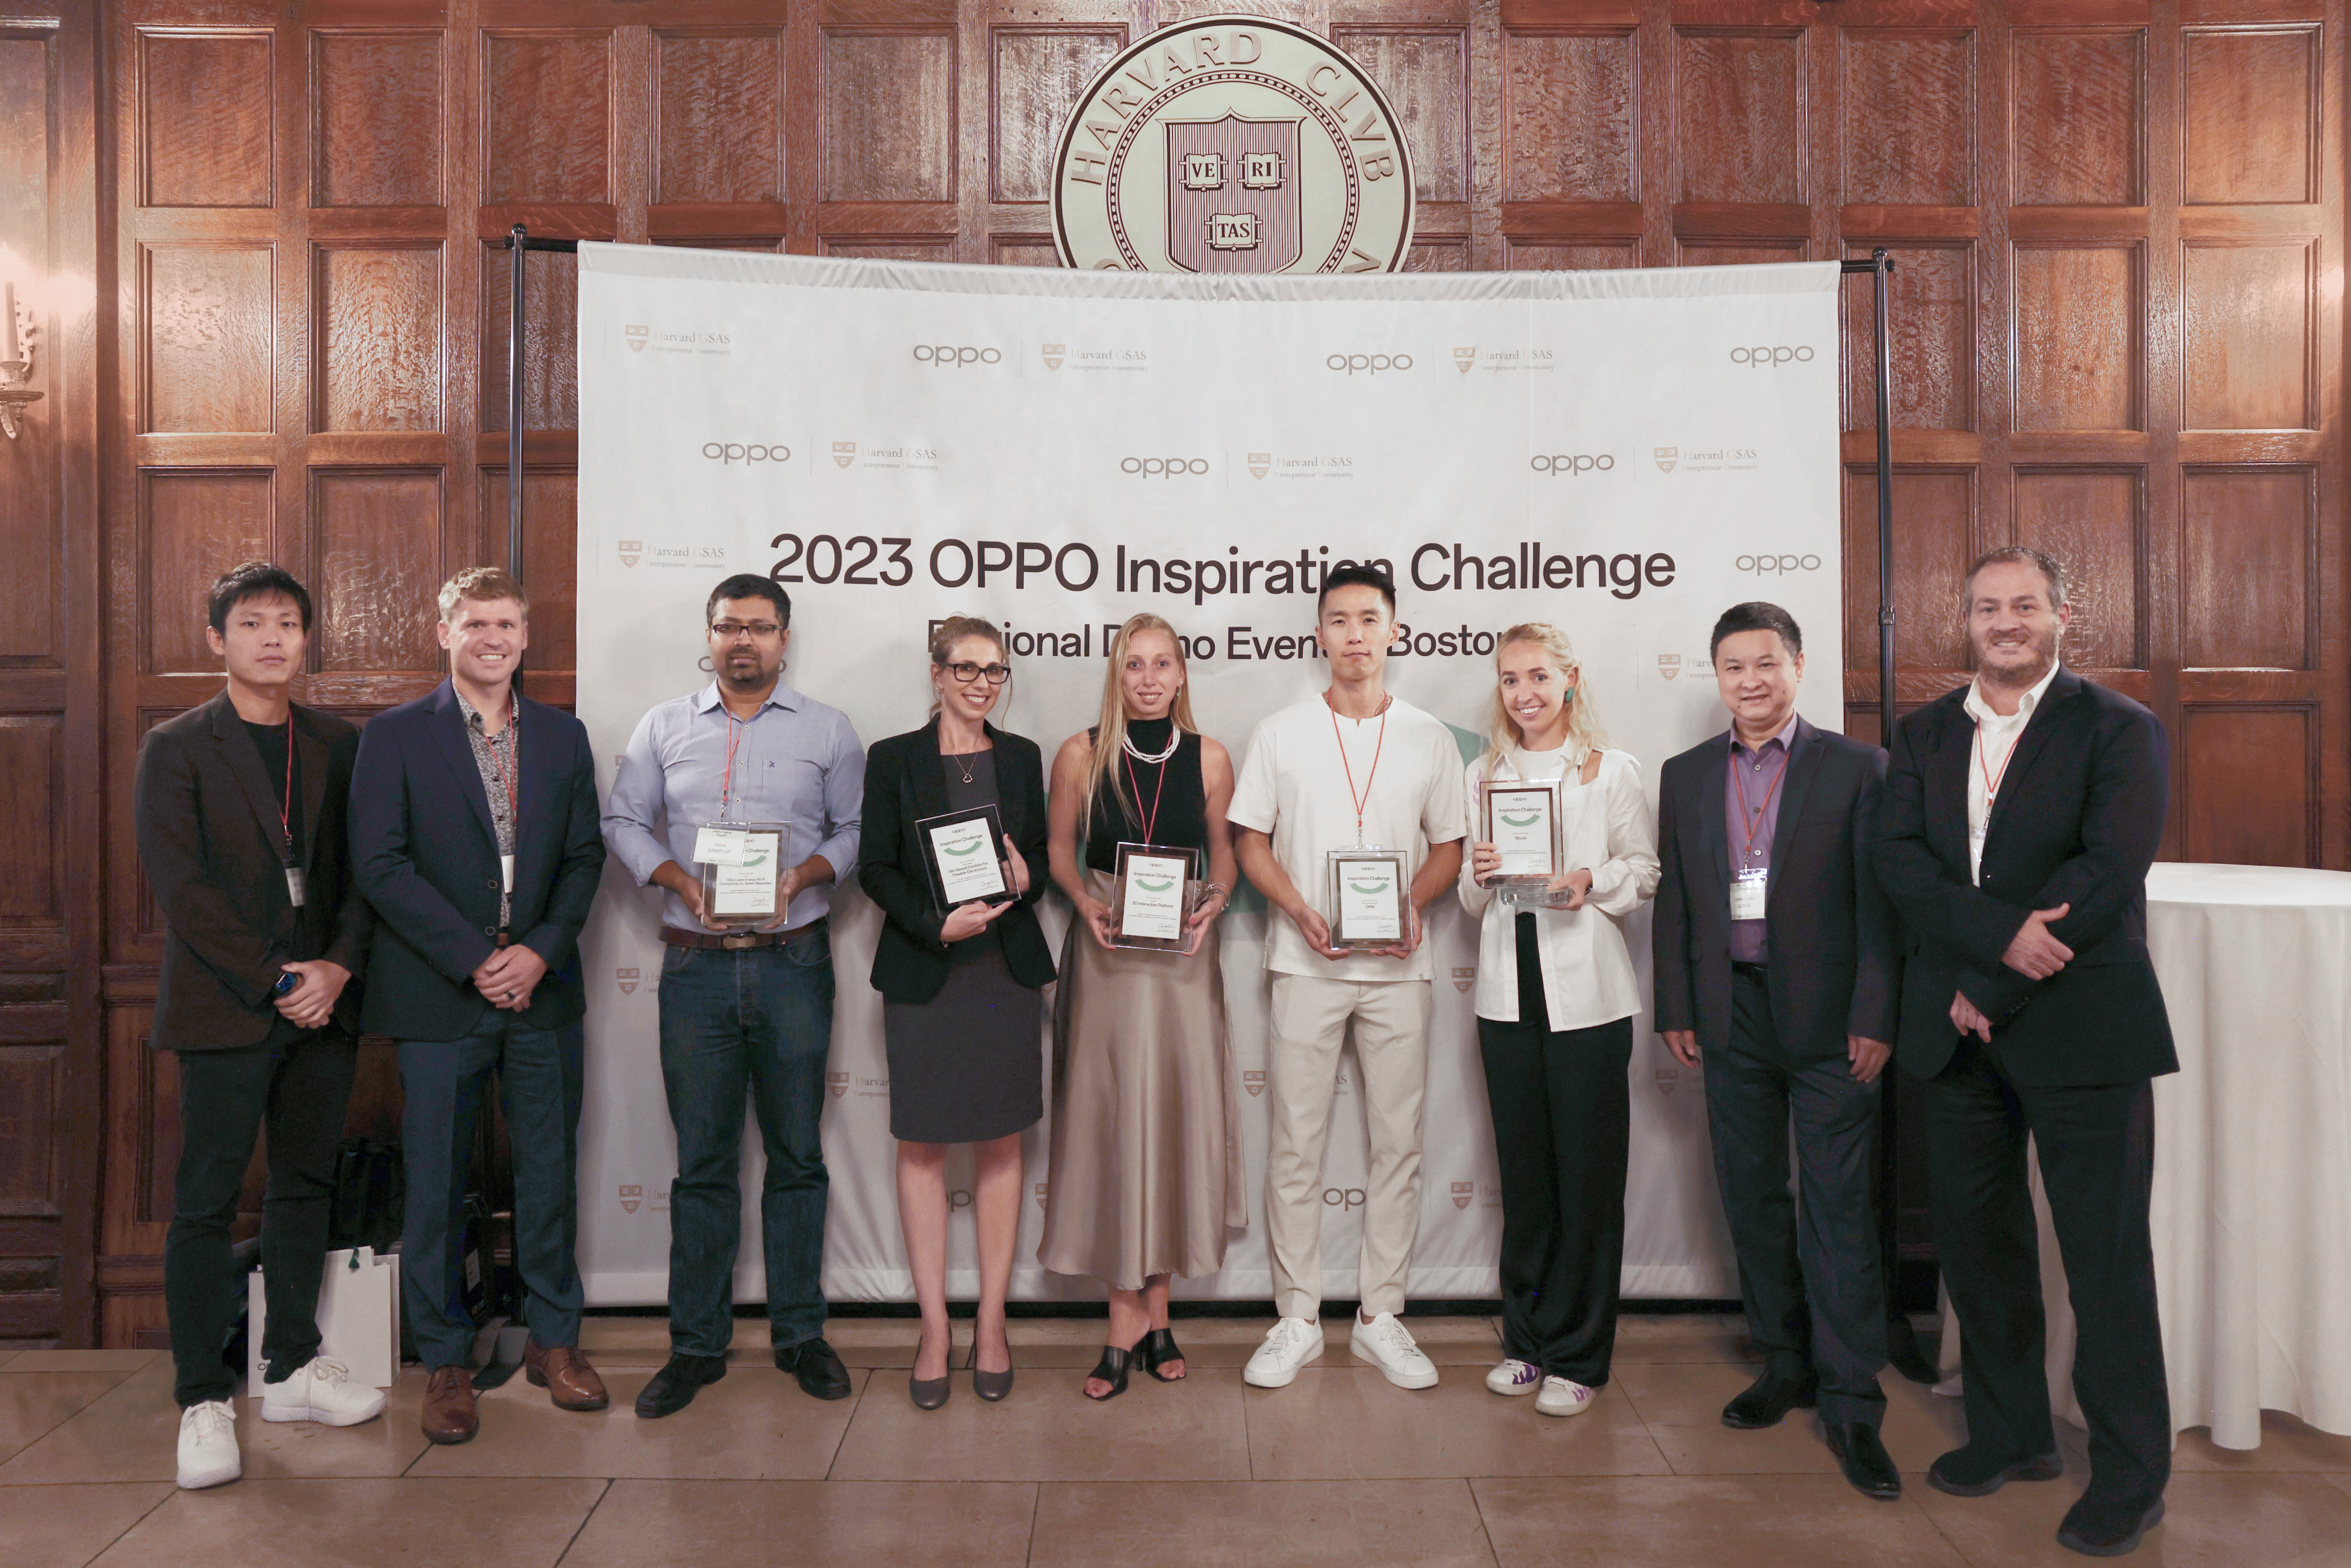 The Award Ceremony of the 2023 OPPO Inspiration Challenge Regional Demo Event in Boston